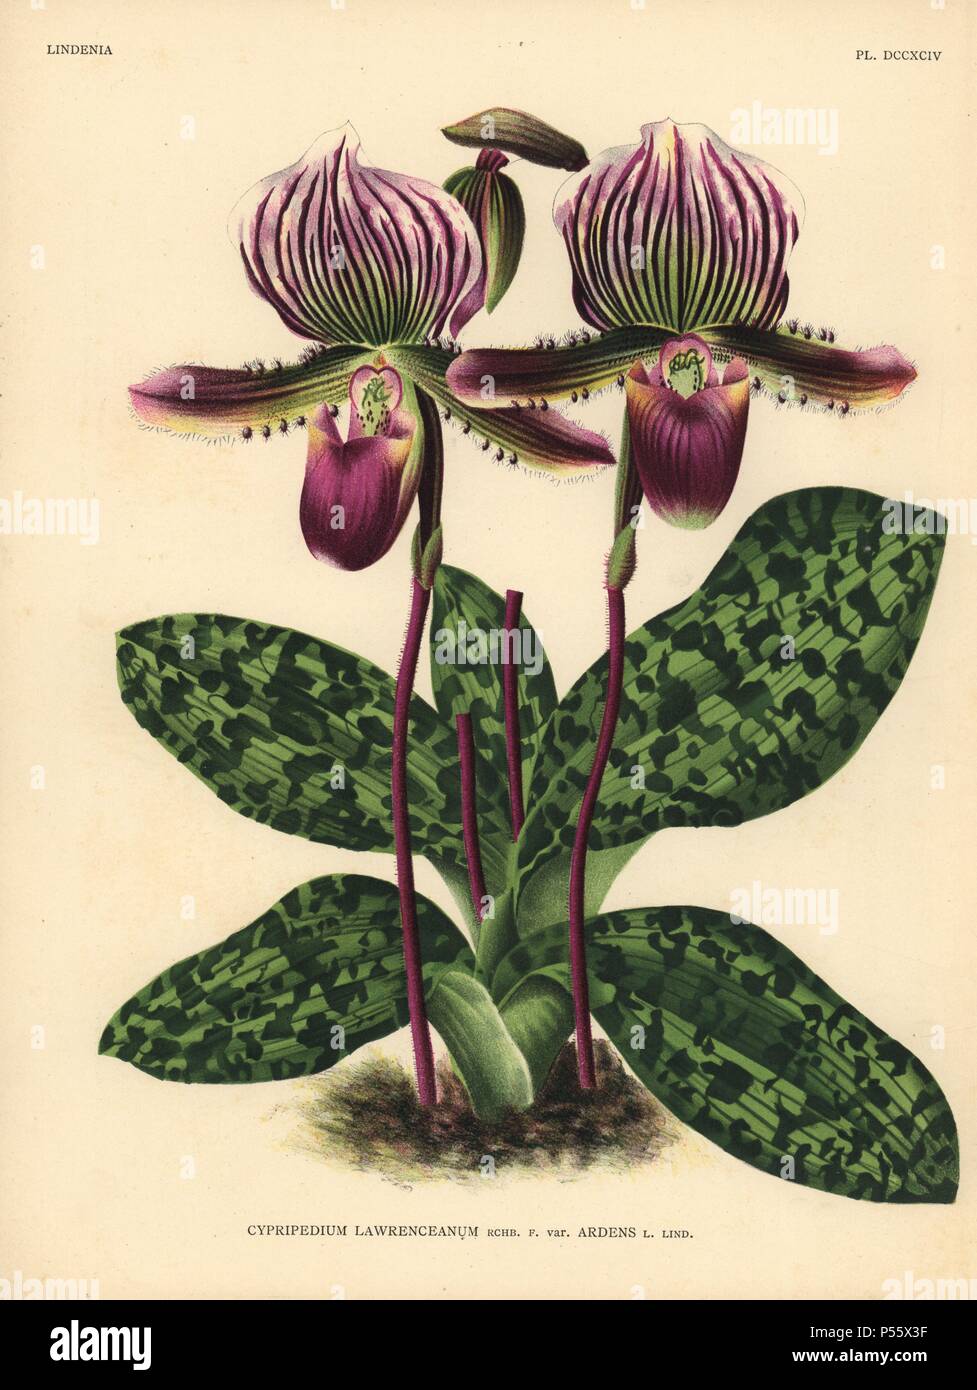 Sir Trevor Lawrence's Cypripedium orchid. Botanical illustration in chromolithograph from Lucien Linden's "Lindenia, Iconographie des Orchidees," Brussels, 1903. Stock Photo